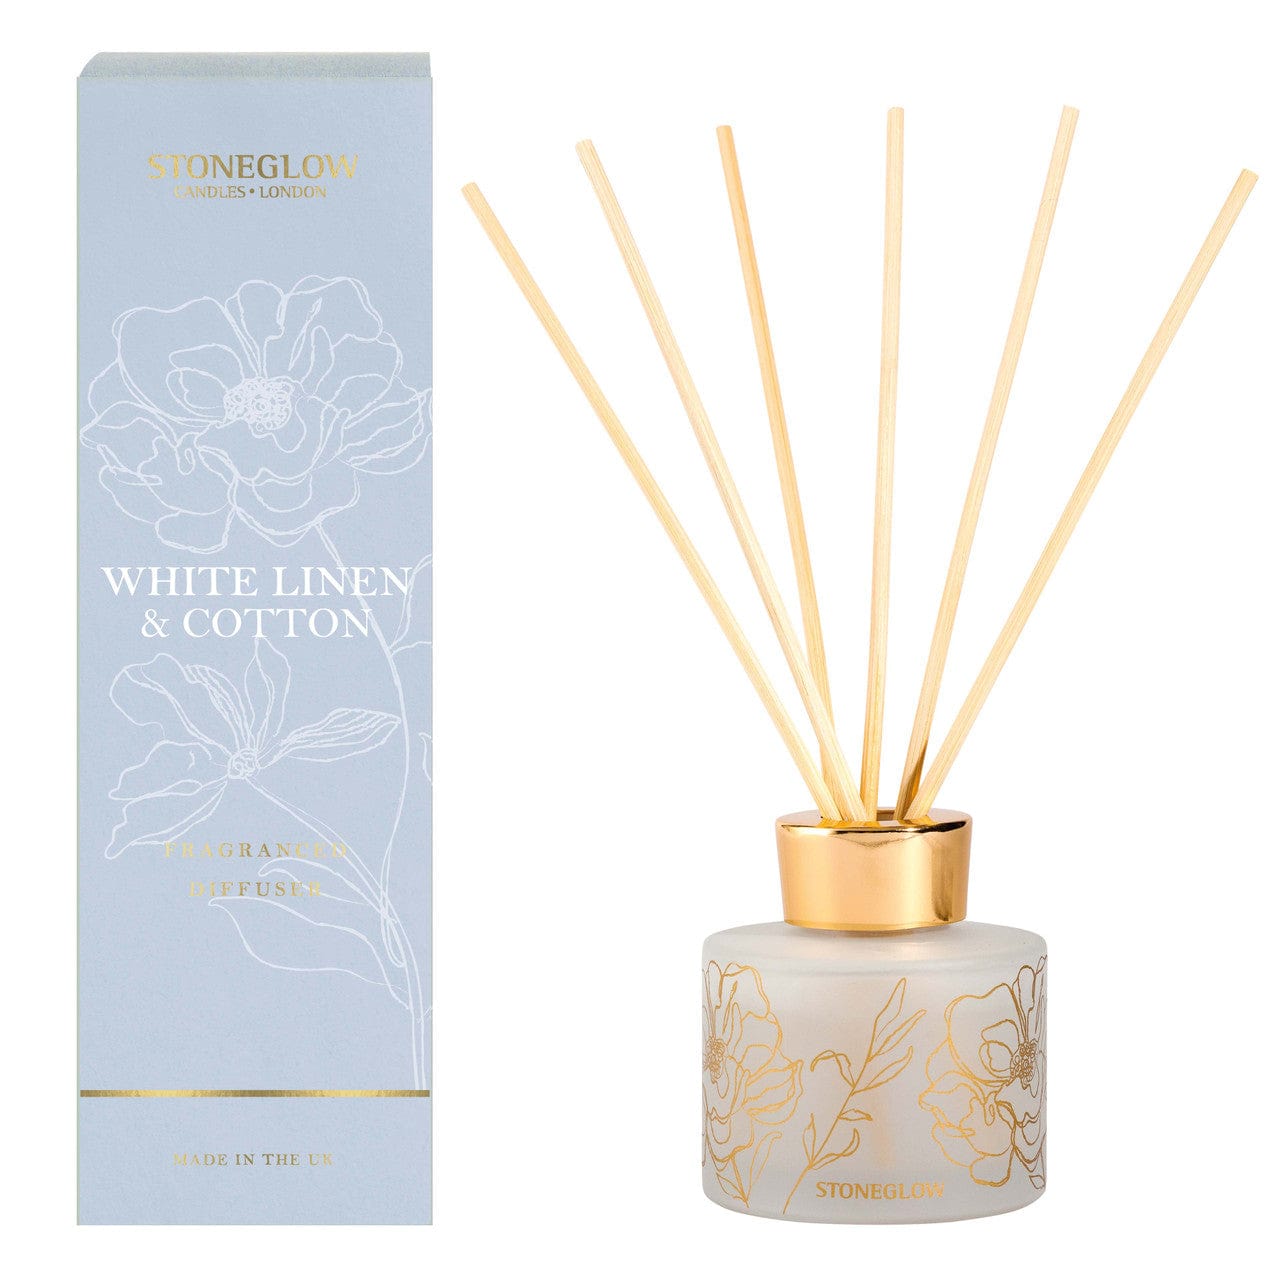 Stoneglow Day Flower - White Linen & Cotton - Reed Diffuser 120ml